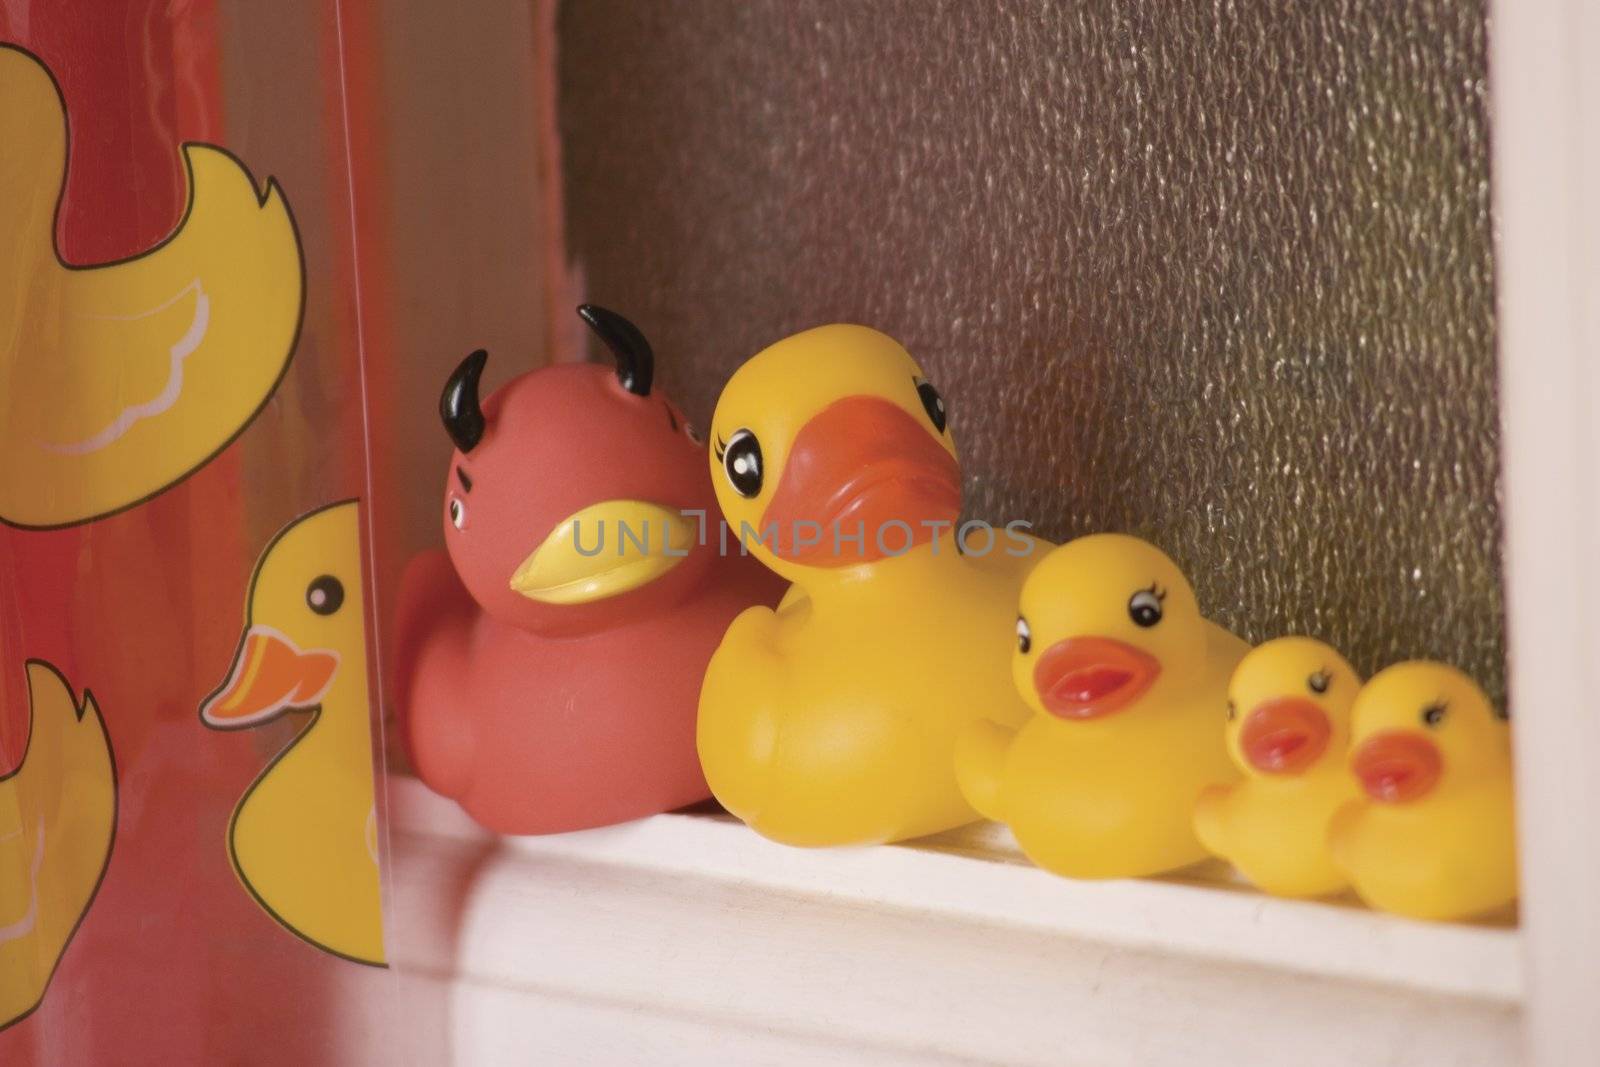 Line of rubber ducky place on bathroom window ledge